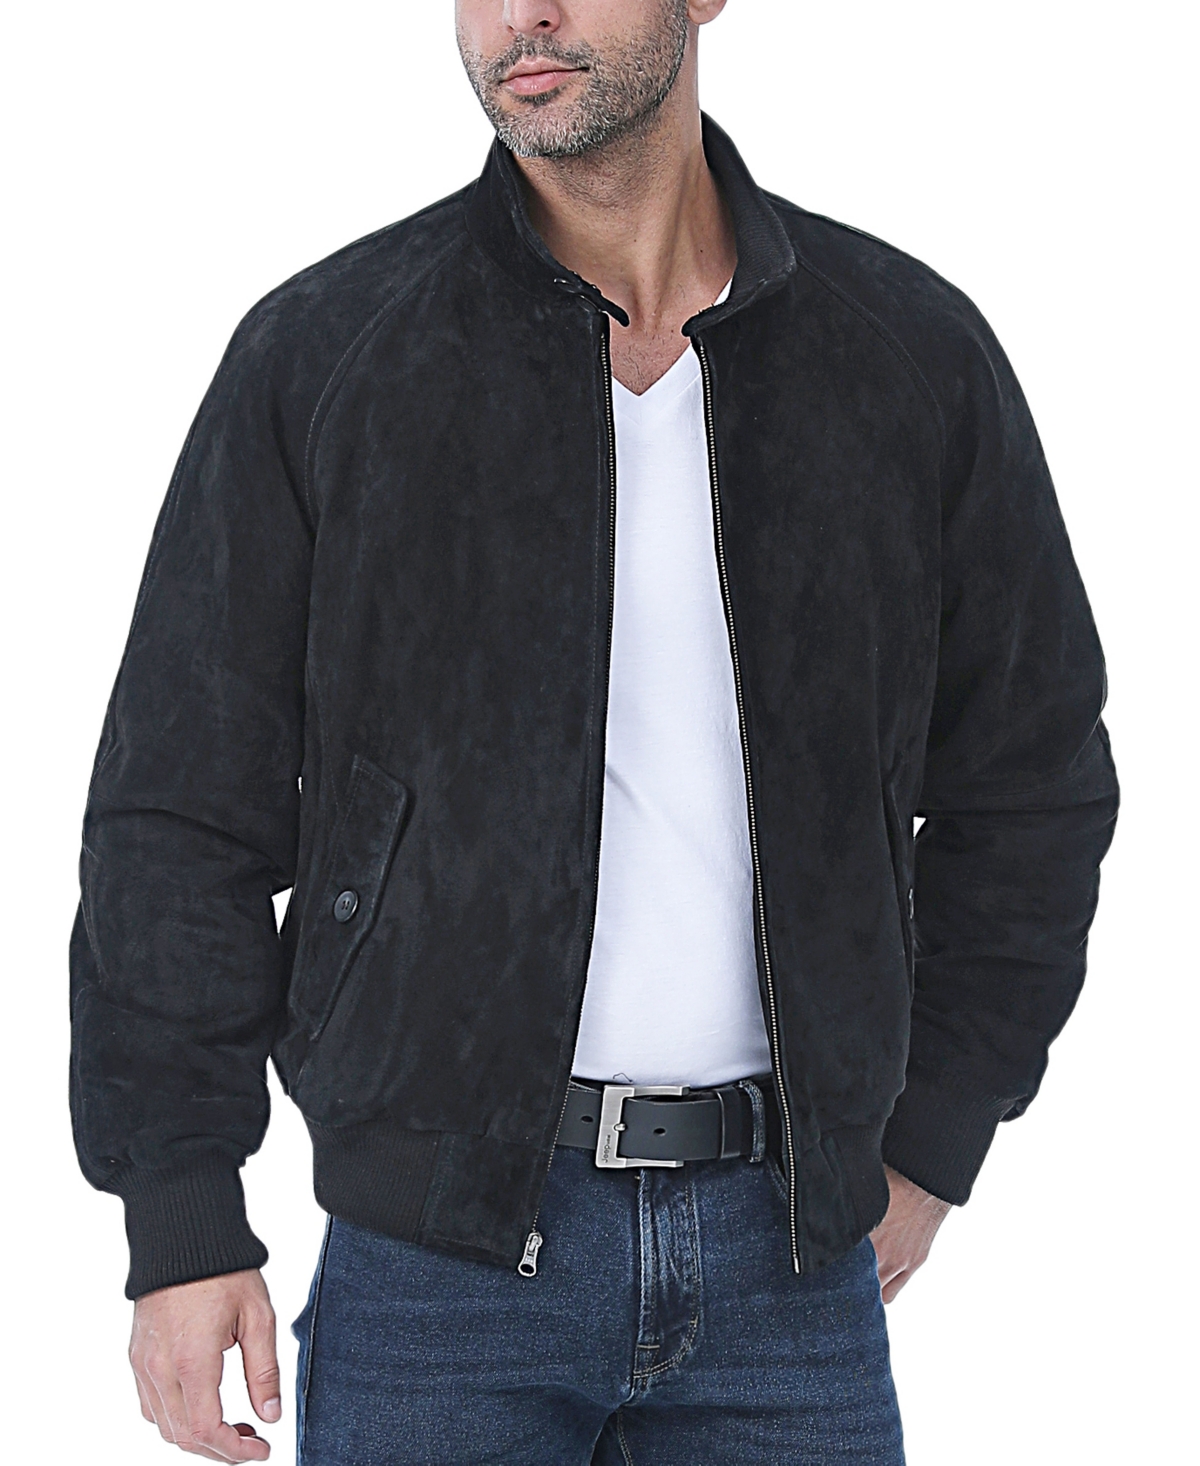 Men Wwii Suede Leather Bomber Jacket - Tobacco